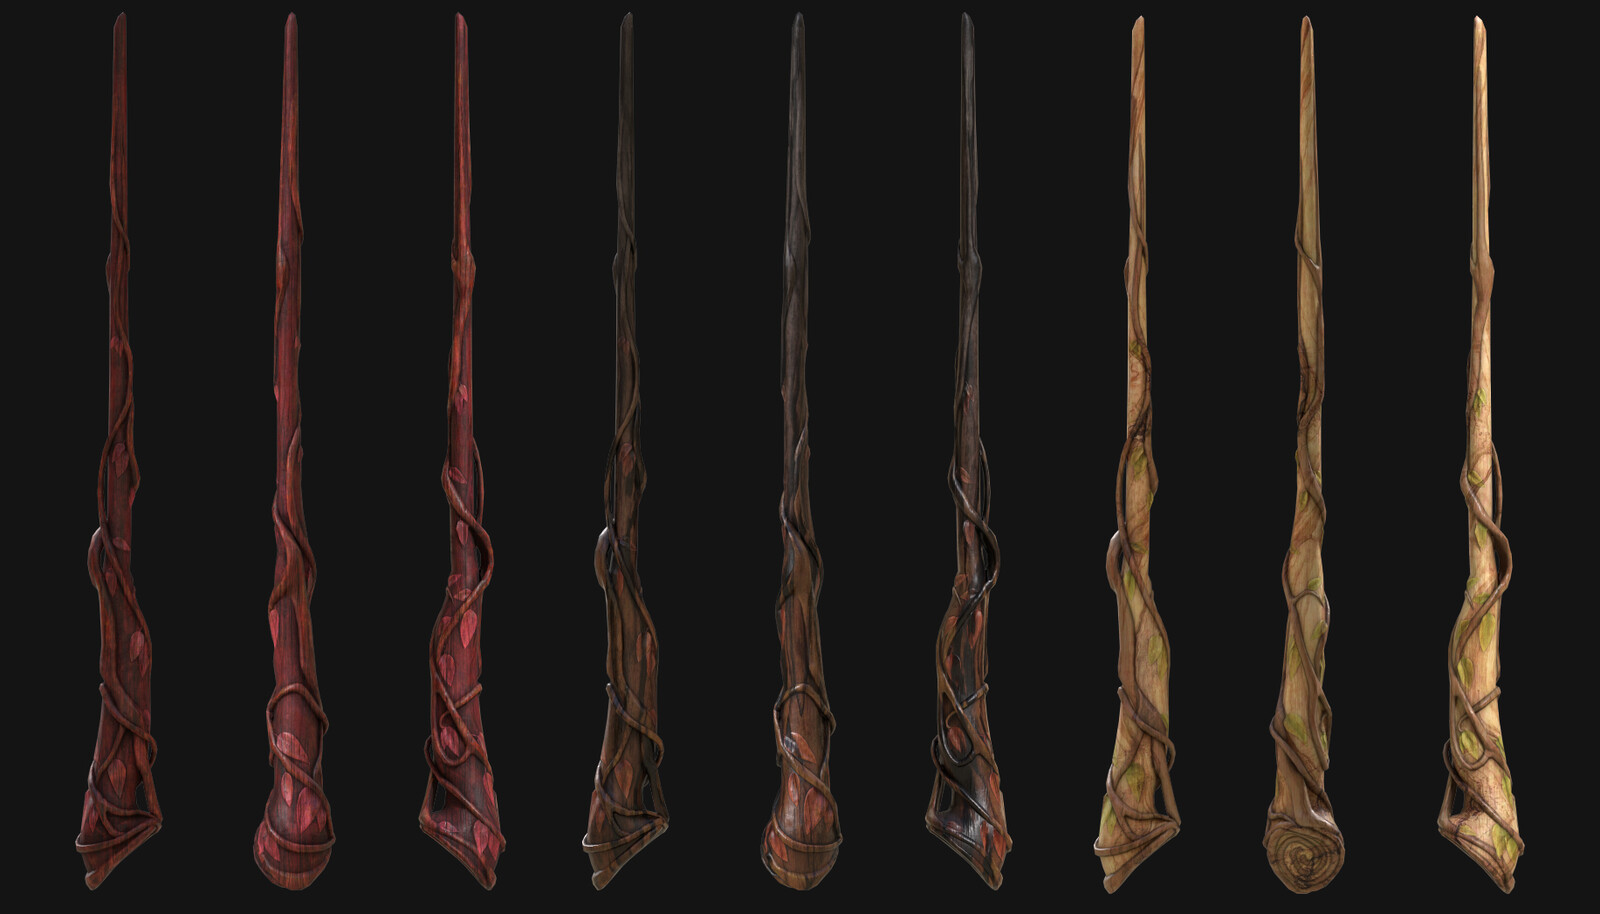 Professor Shaw's Wand and variations